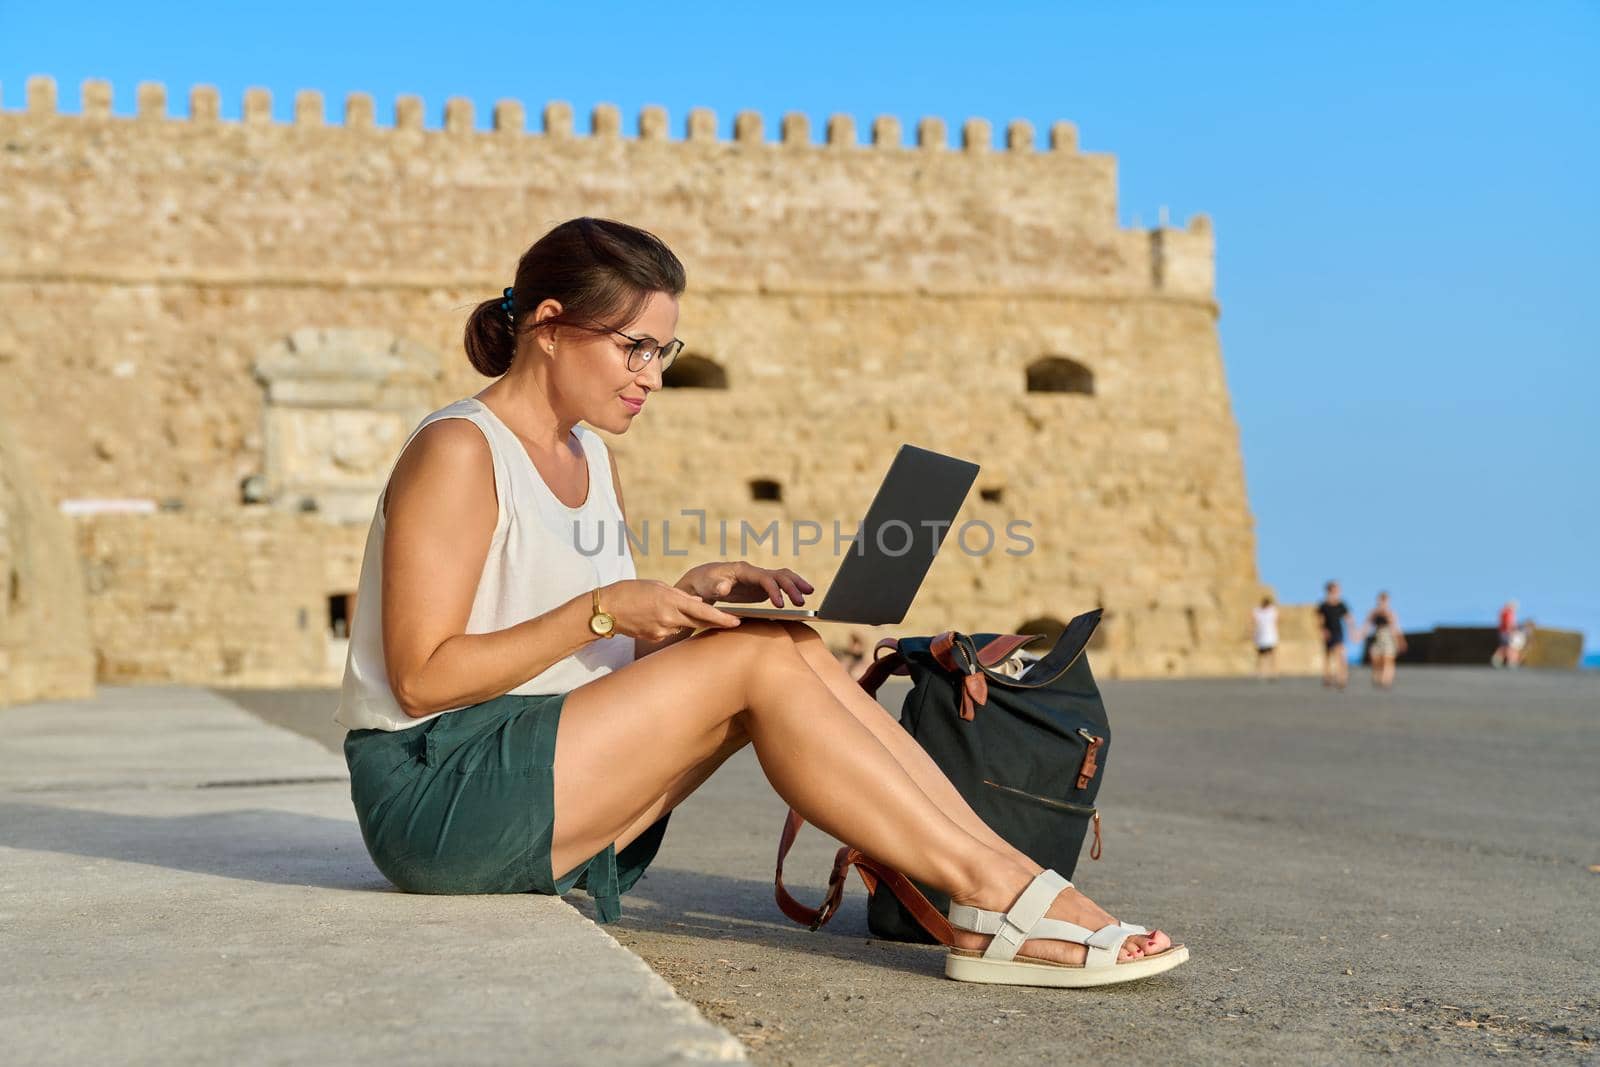 Mature woman tourist using laptop, old european historic fortress background. Technology, vacations, tourism, leisure, active lifestyle, middle aged people concept